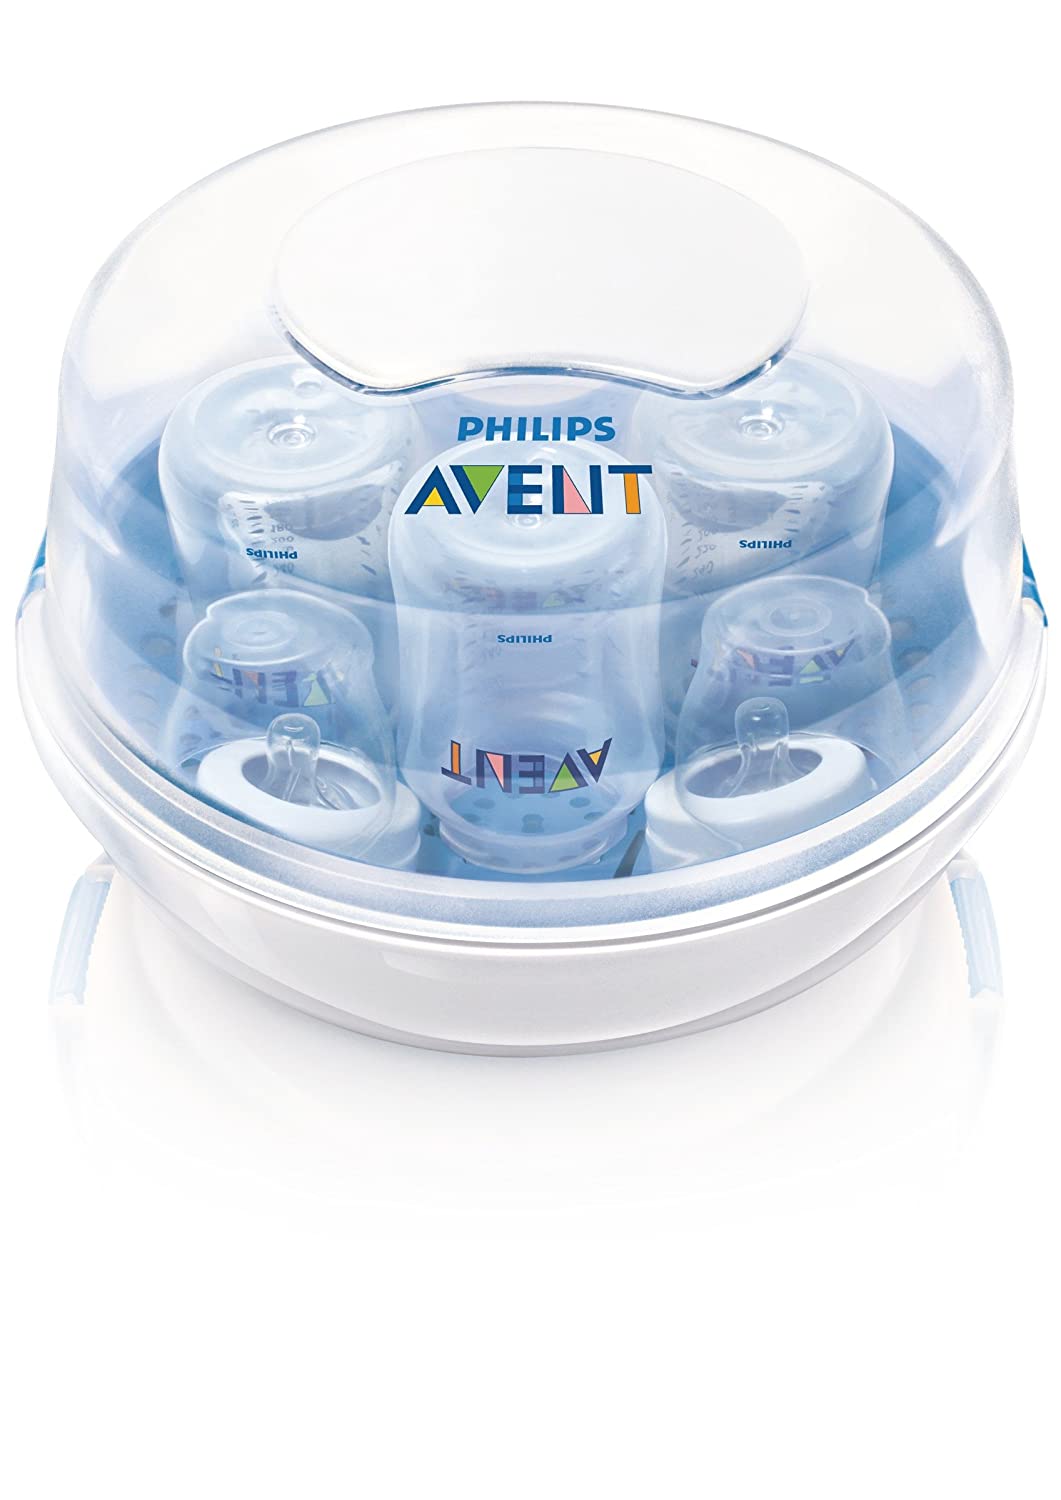 Philips Avent Microwave Steam Sterilizer for Baby Bottles, Pacifiers, Cups and More